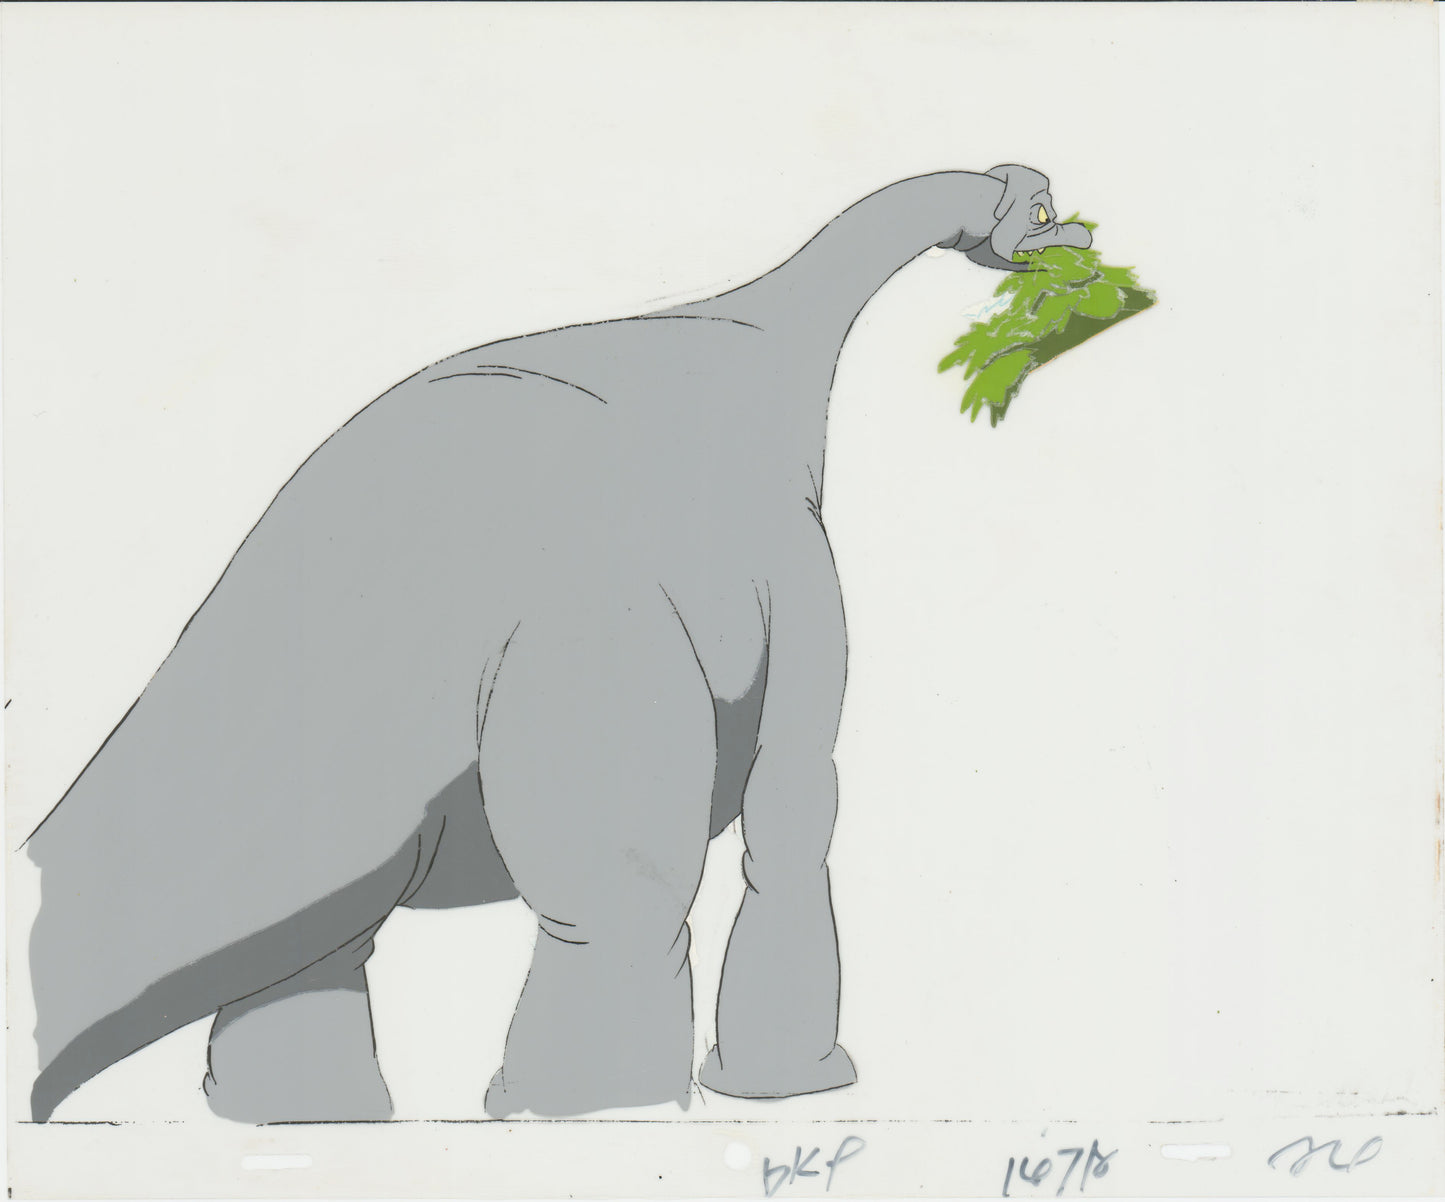 Dink the Little Dinosaur Production Animation Cel from Ruby Spears 1989-90 8-814